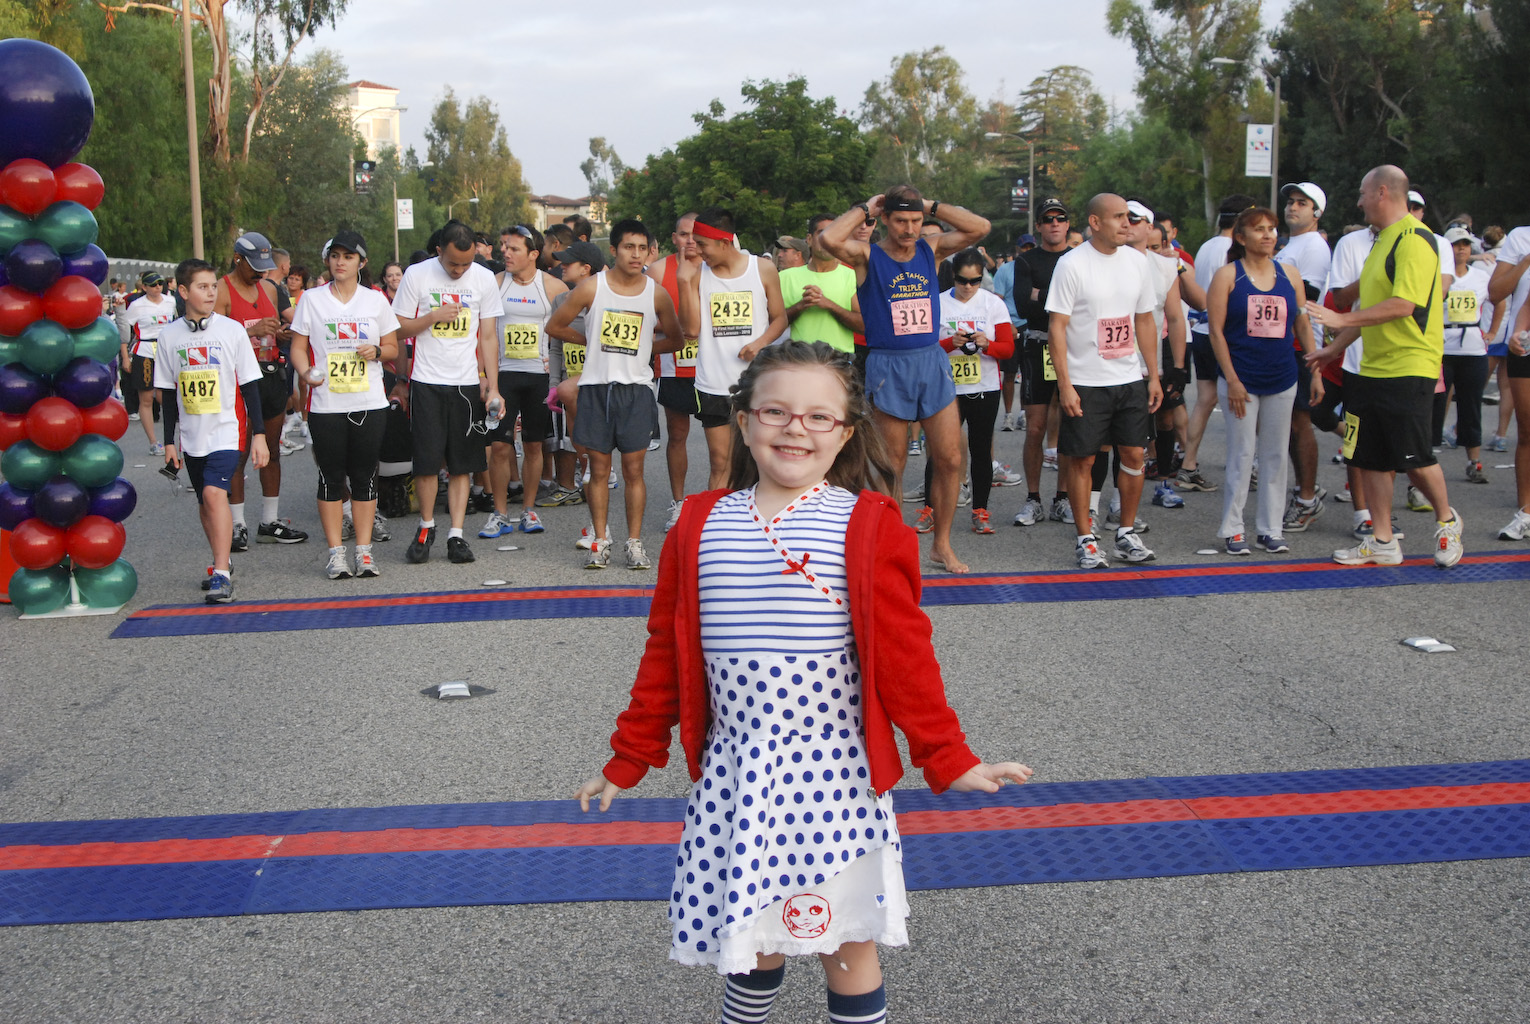 Marlowe sings the National Anthem at the start of the Santa Clarita marathon, for a 5000+ crowd!